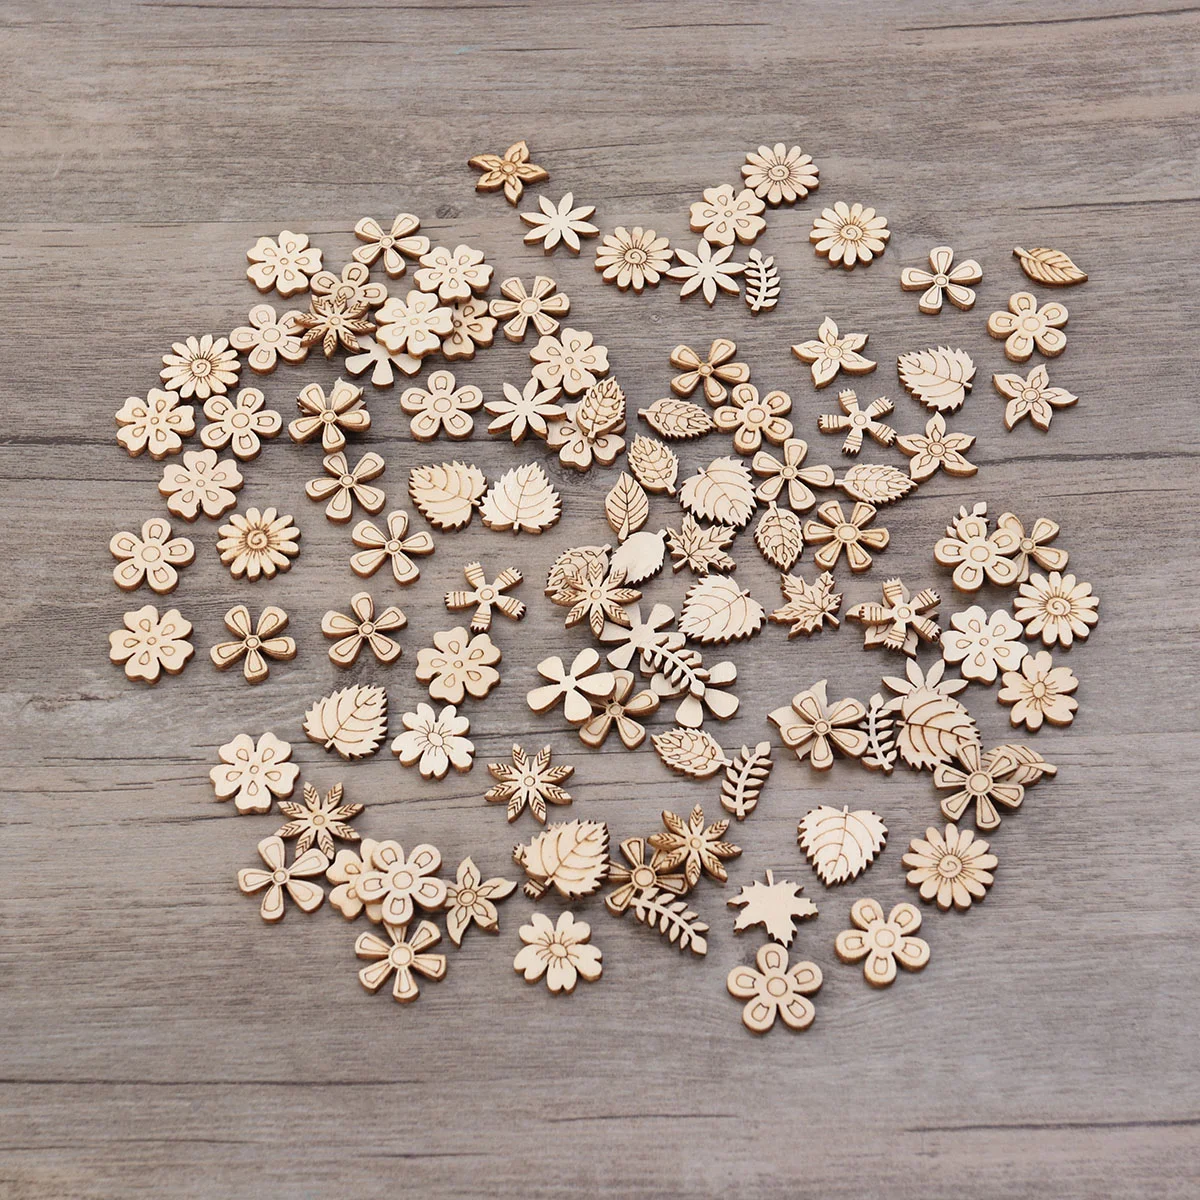 

Wood Wooden Flower Craft Shapes Cutouts Discs Cutout Slices Unfinished Crafts Pieces Embellishments Gift Leaf Tag Tags Pattern